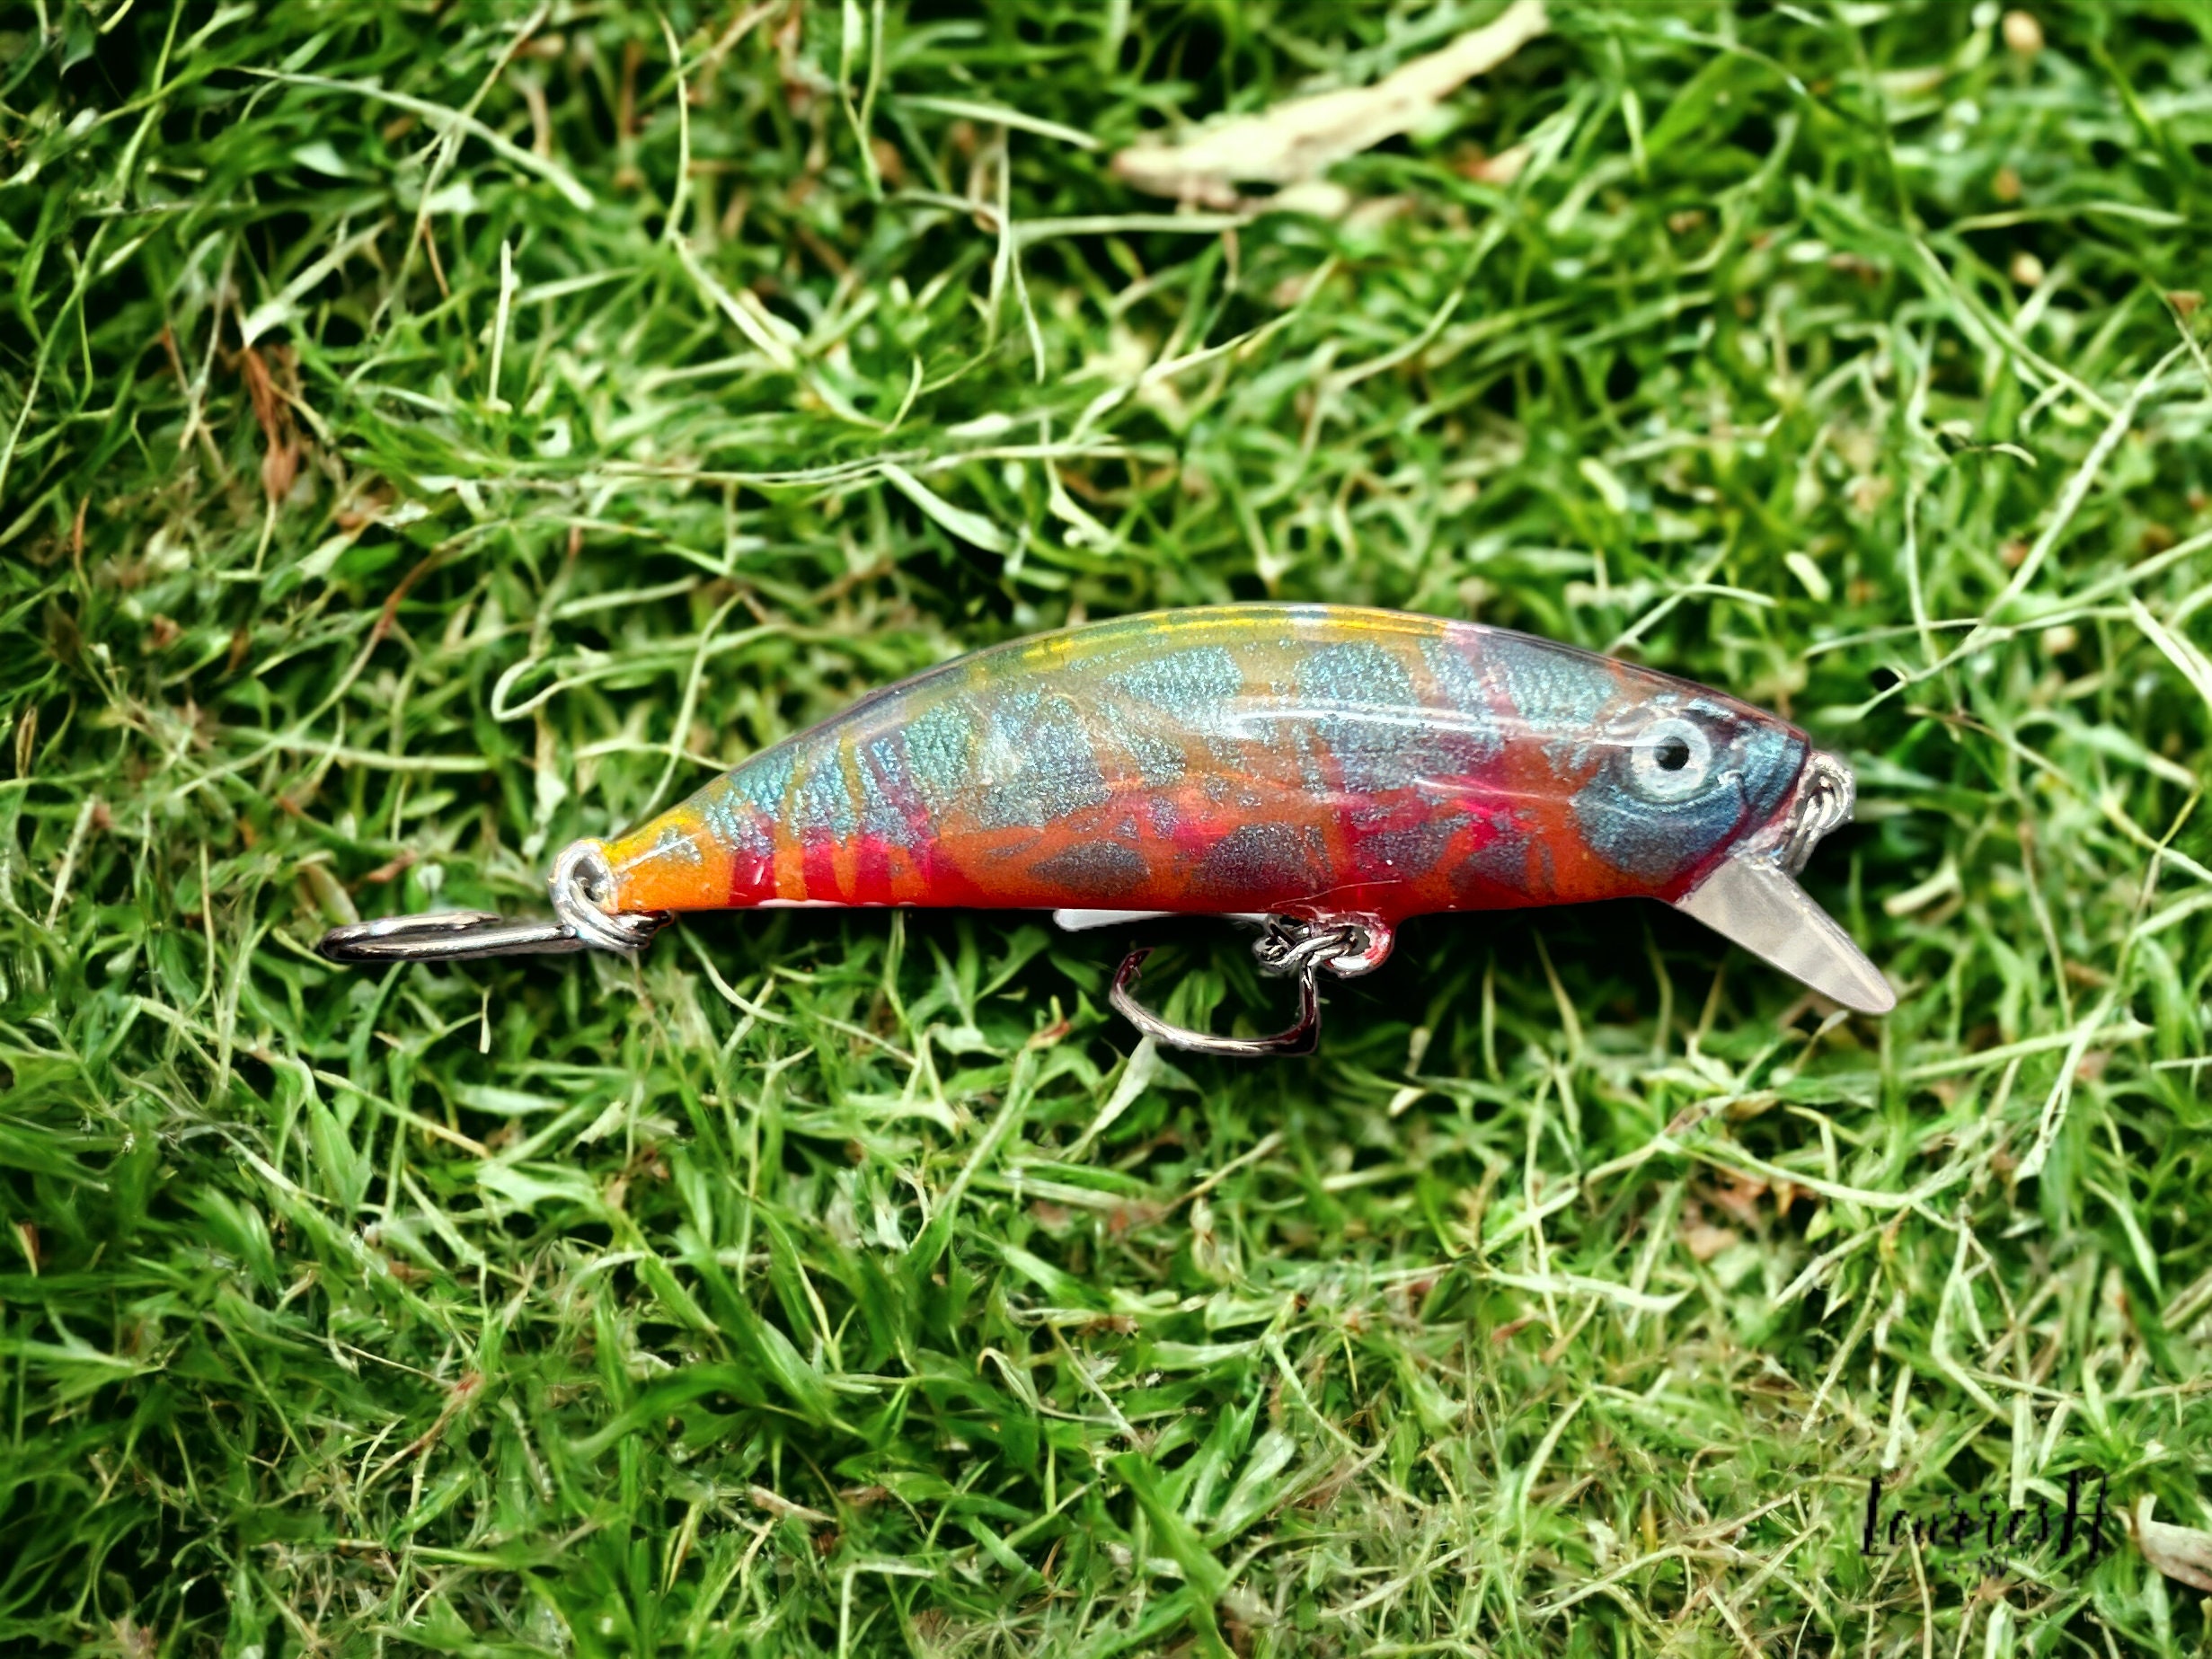 Artisanal Lure for Trout Fishing. Imitation Minnow. Transparent